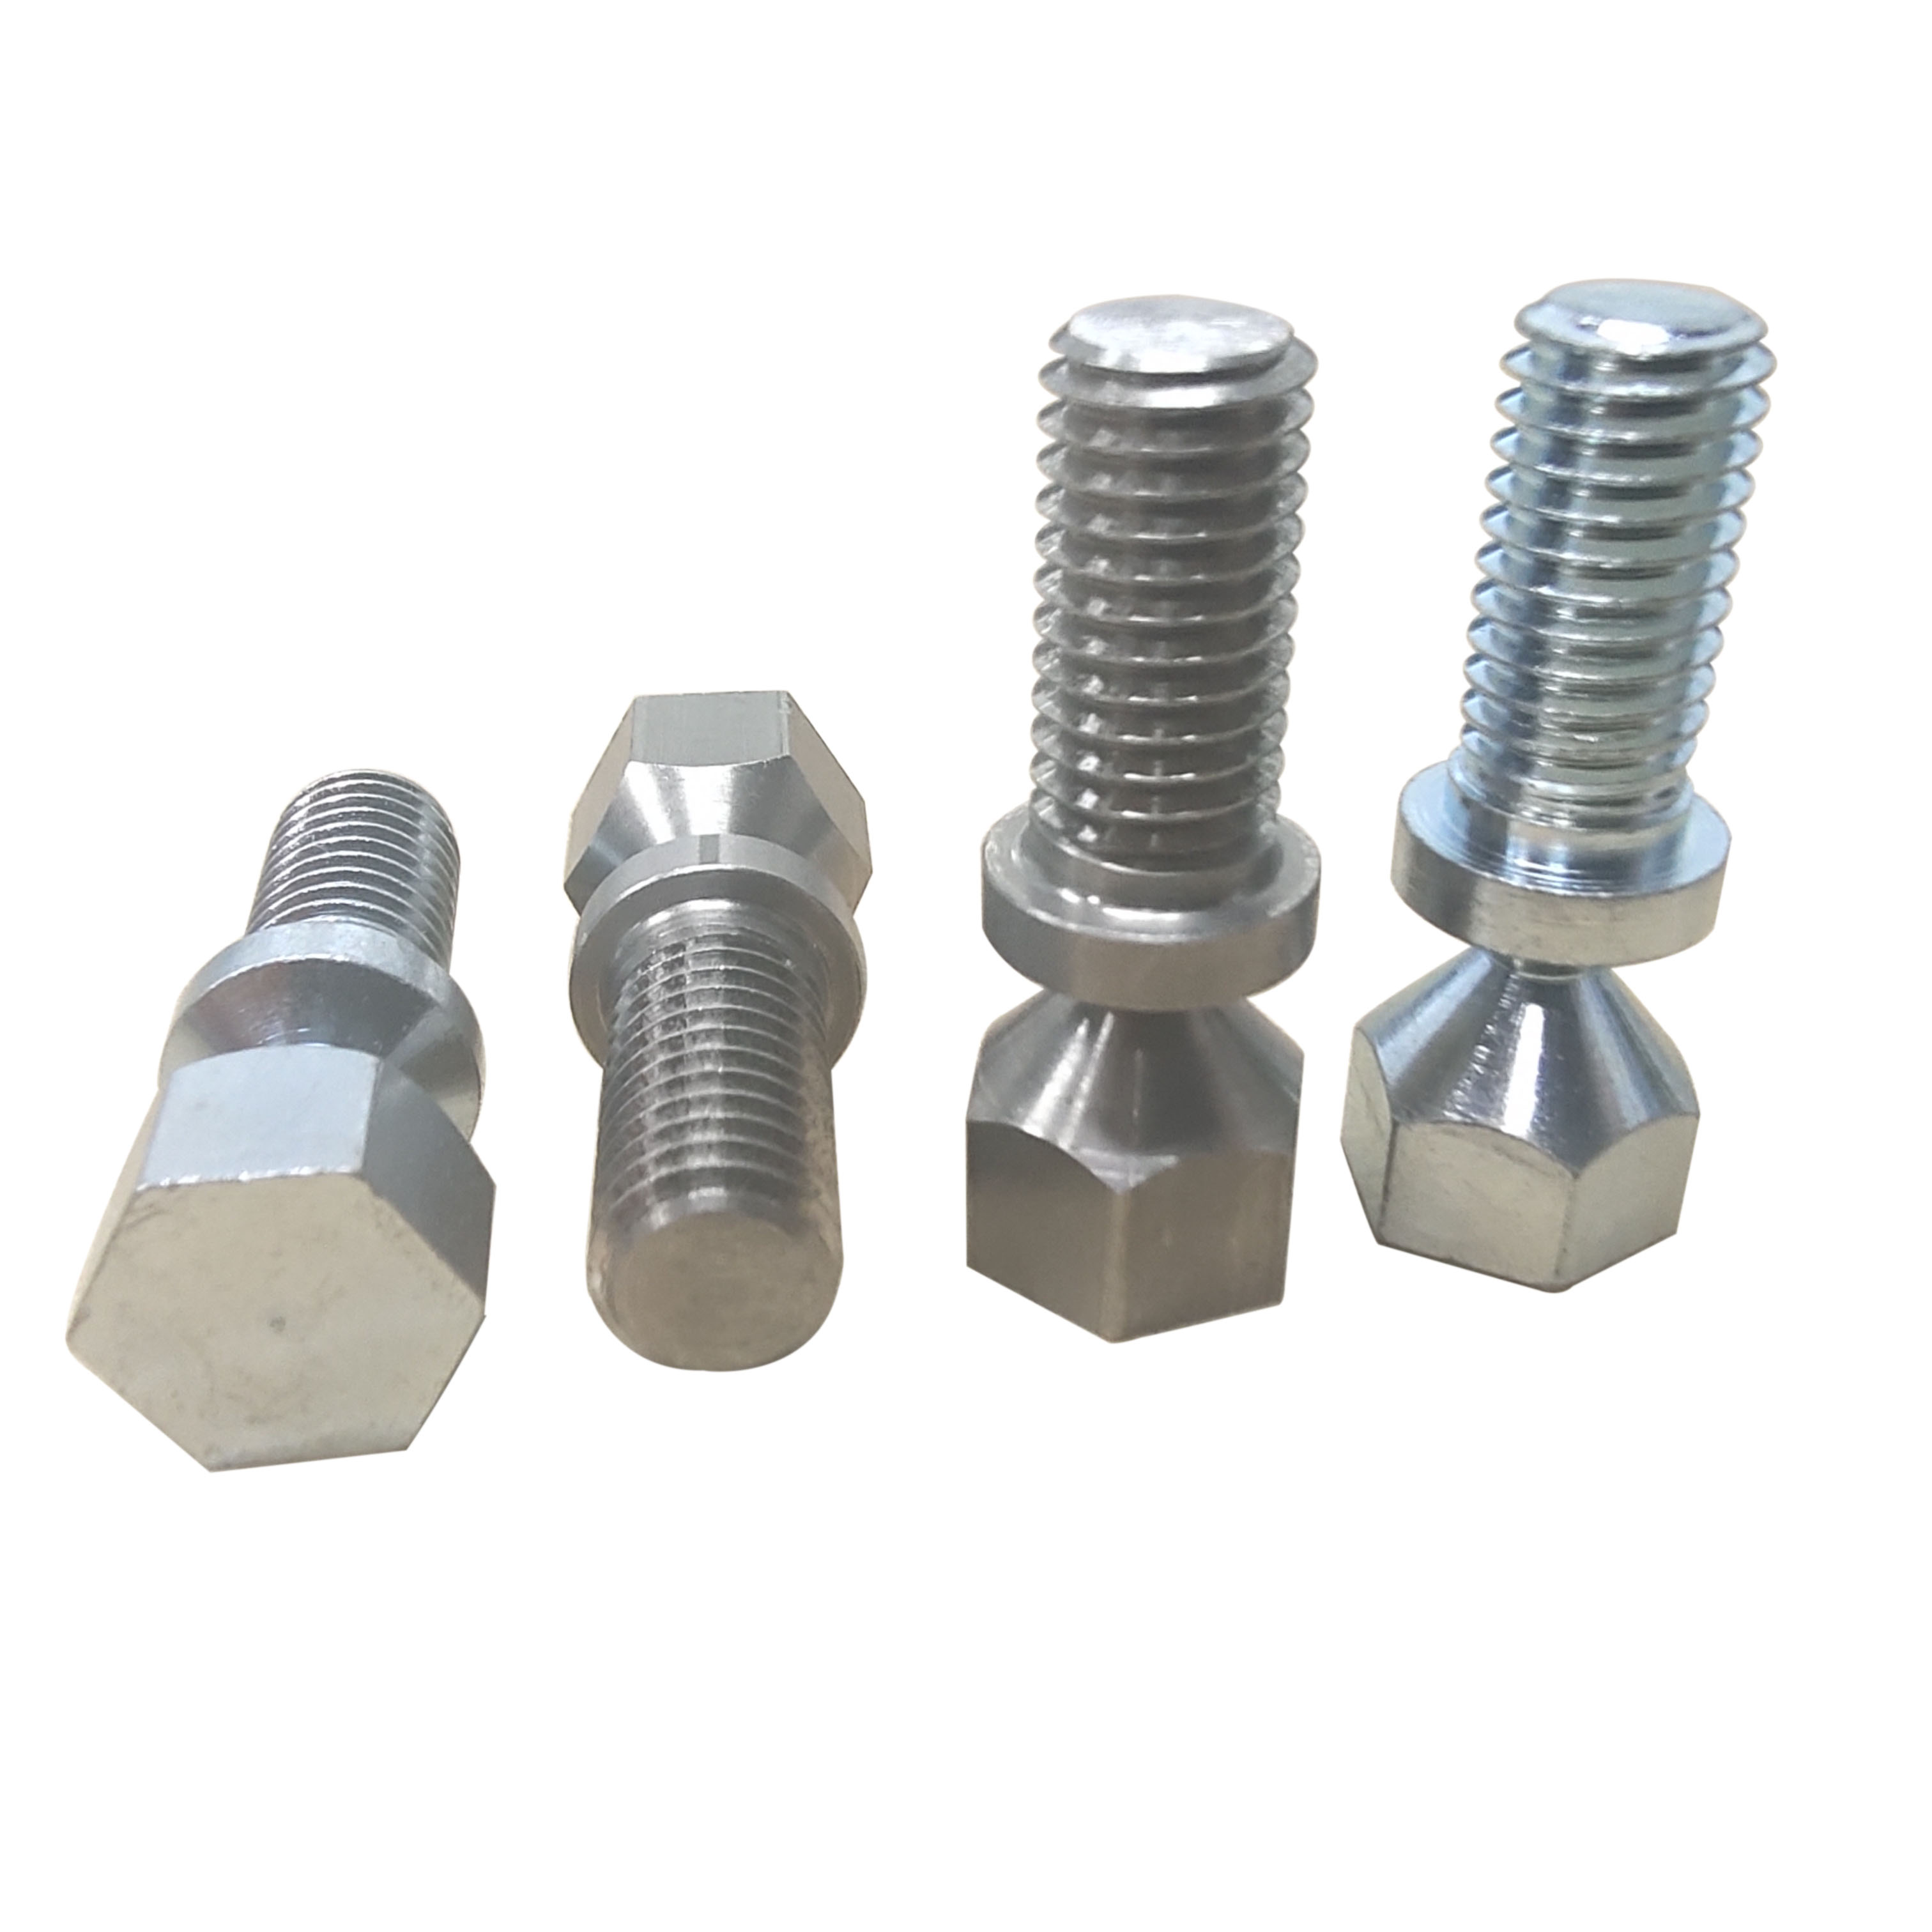 Custom Non-standard 304 Stainless Steel Zinc Plated Safety Bolt Button Head Breakaway Snap Off Security Shear Bolts